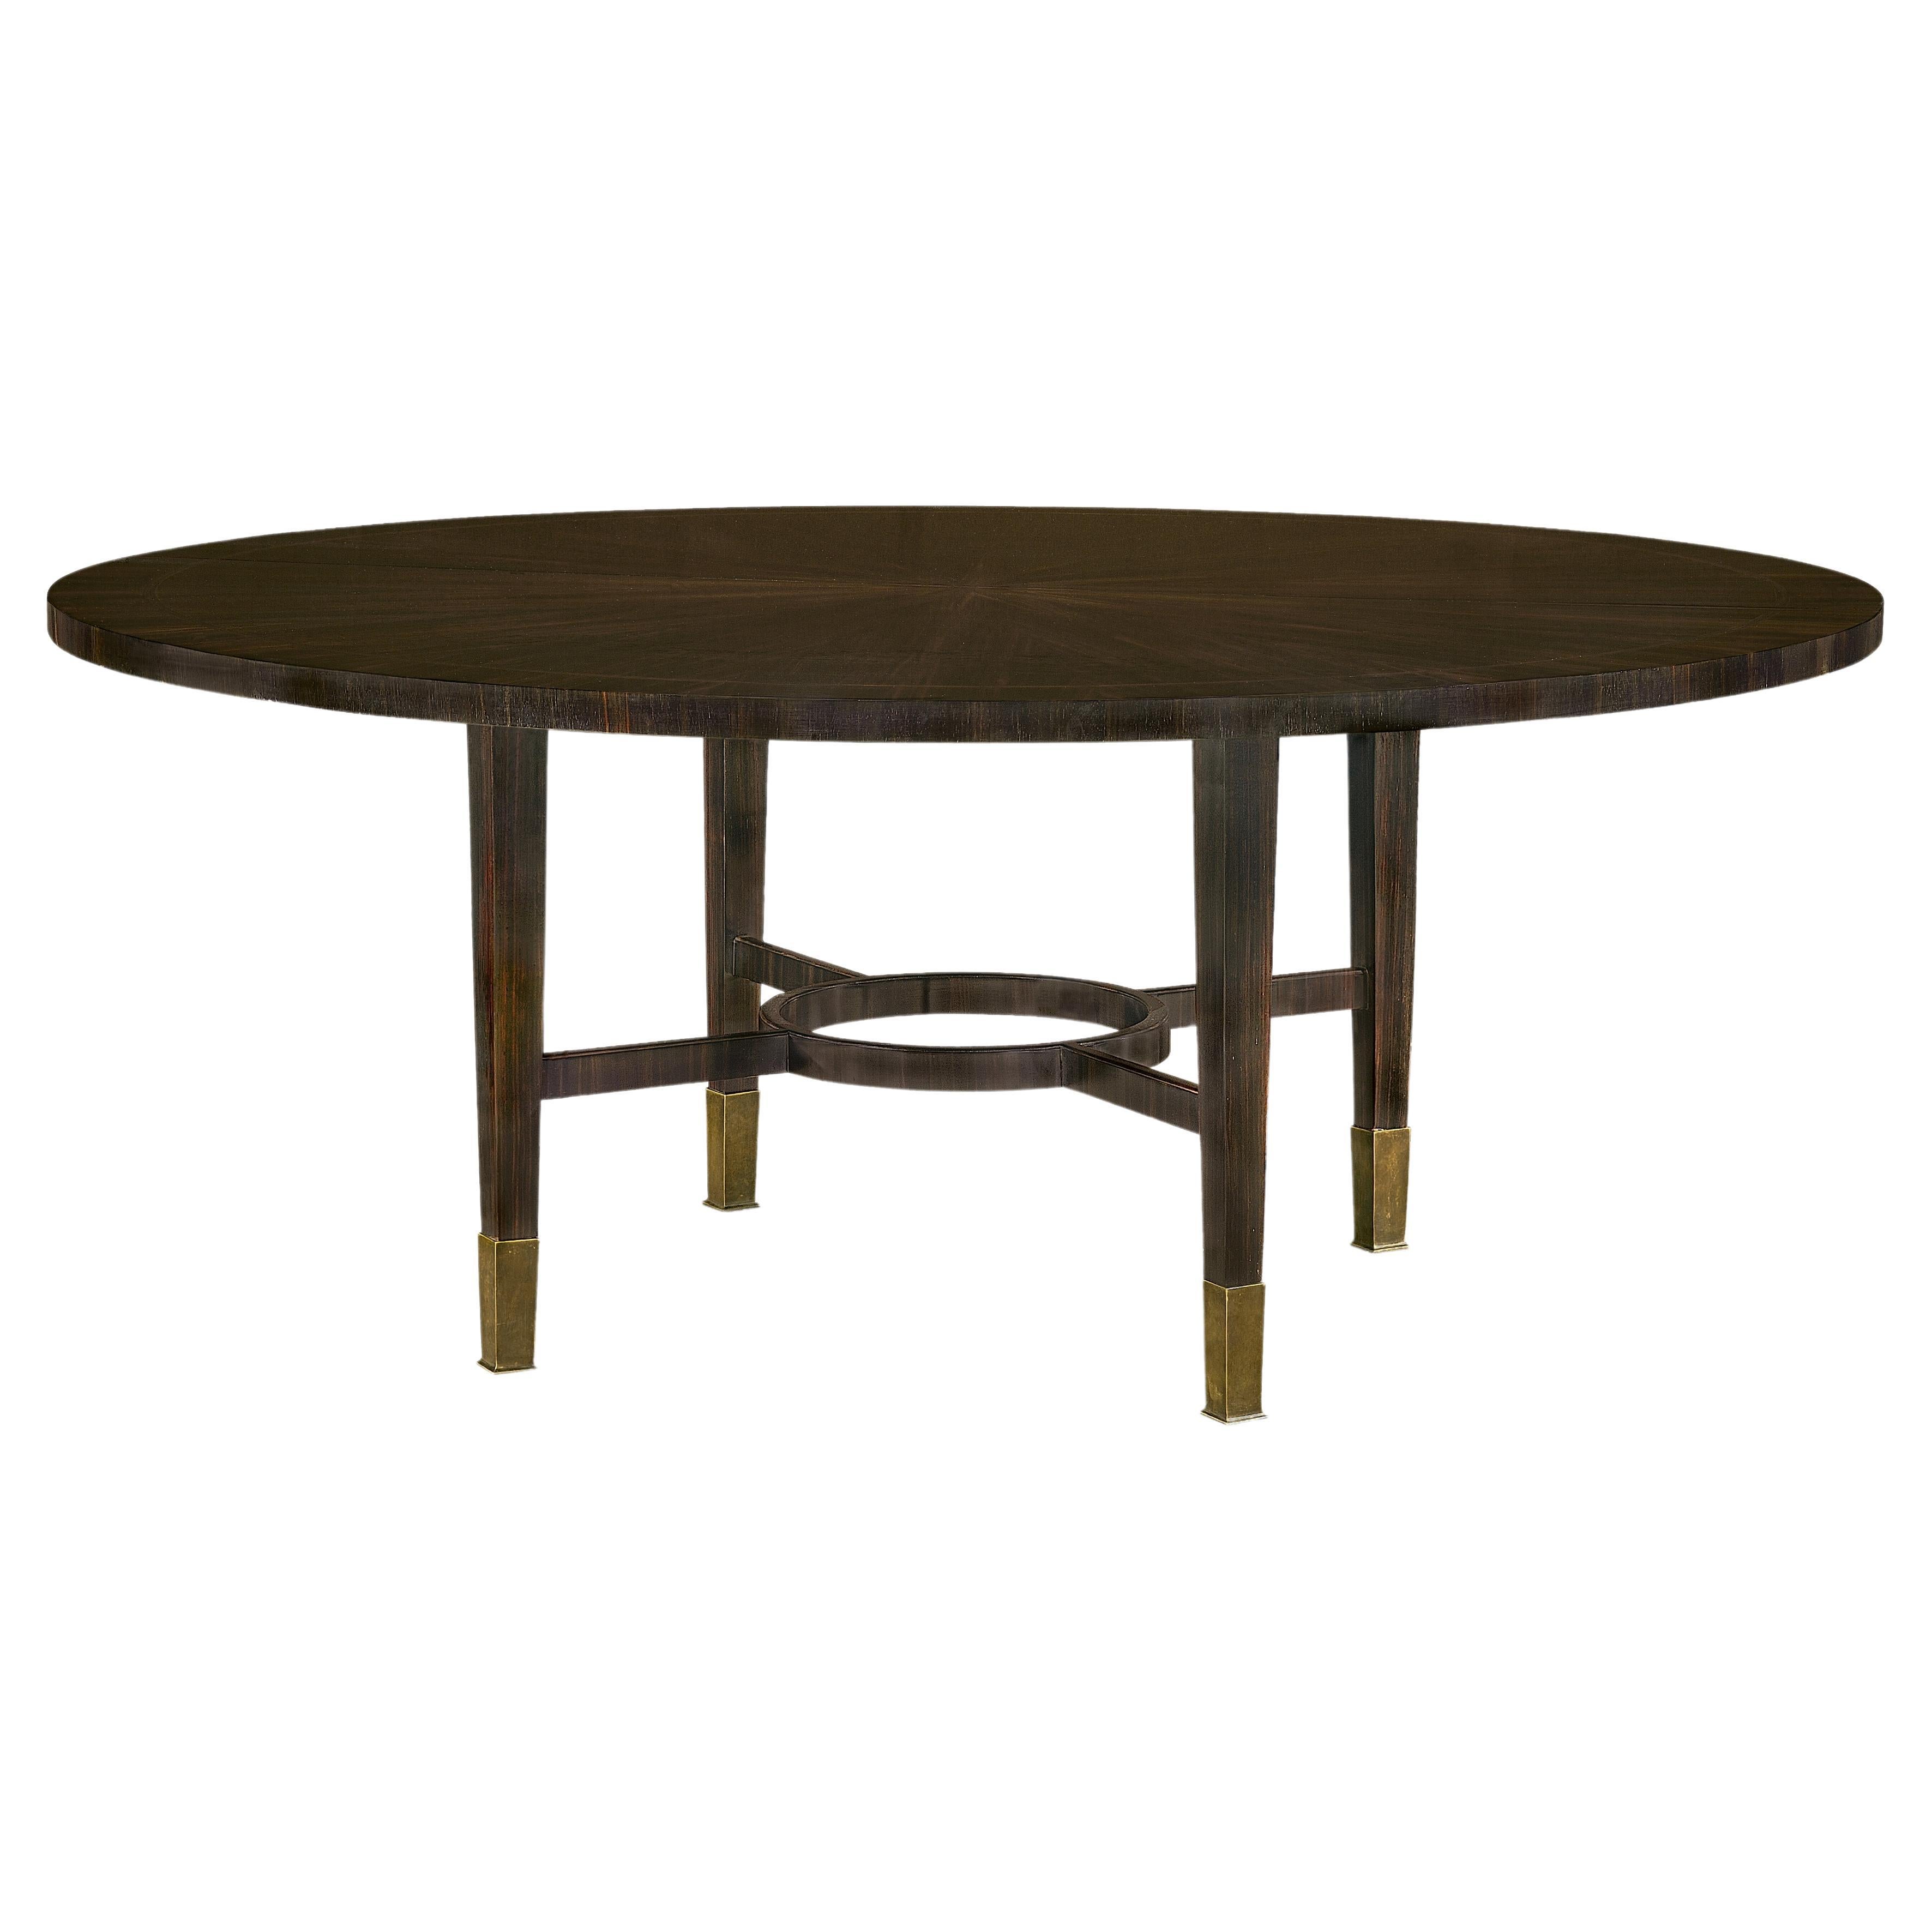 Art Deco inspired Argueil dining table with ebony veneers & legs with brass caps